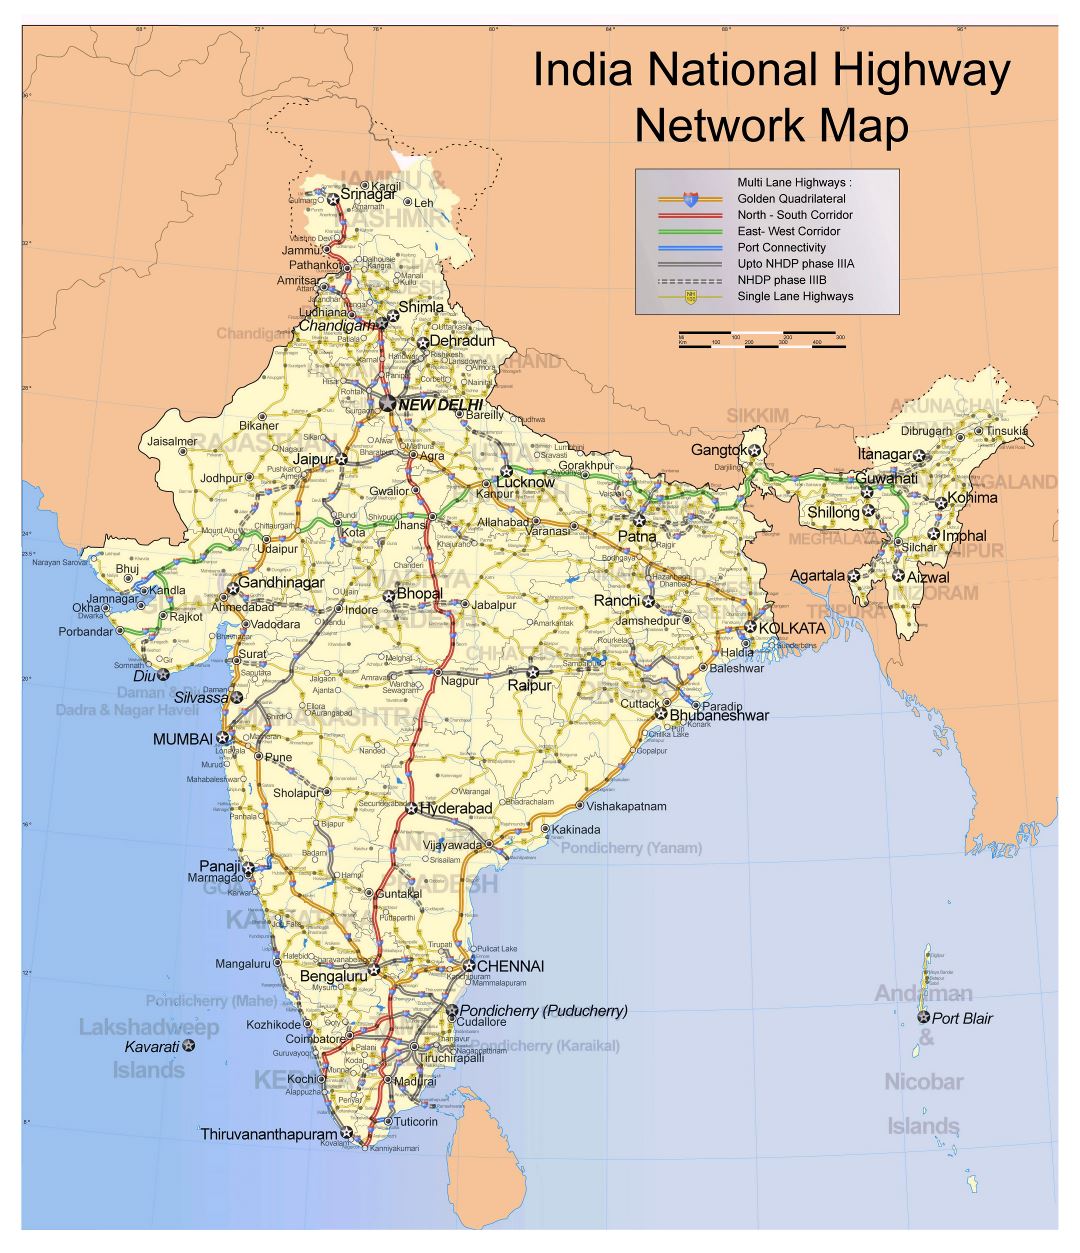 Large scale India National Highway Network map